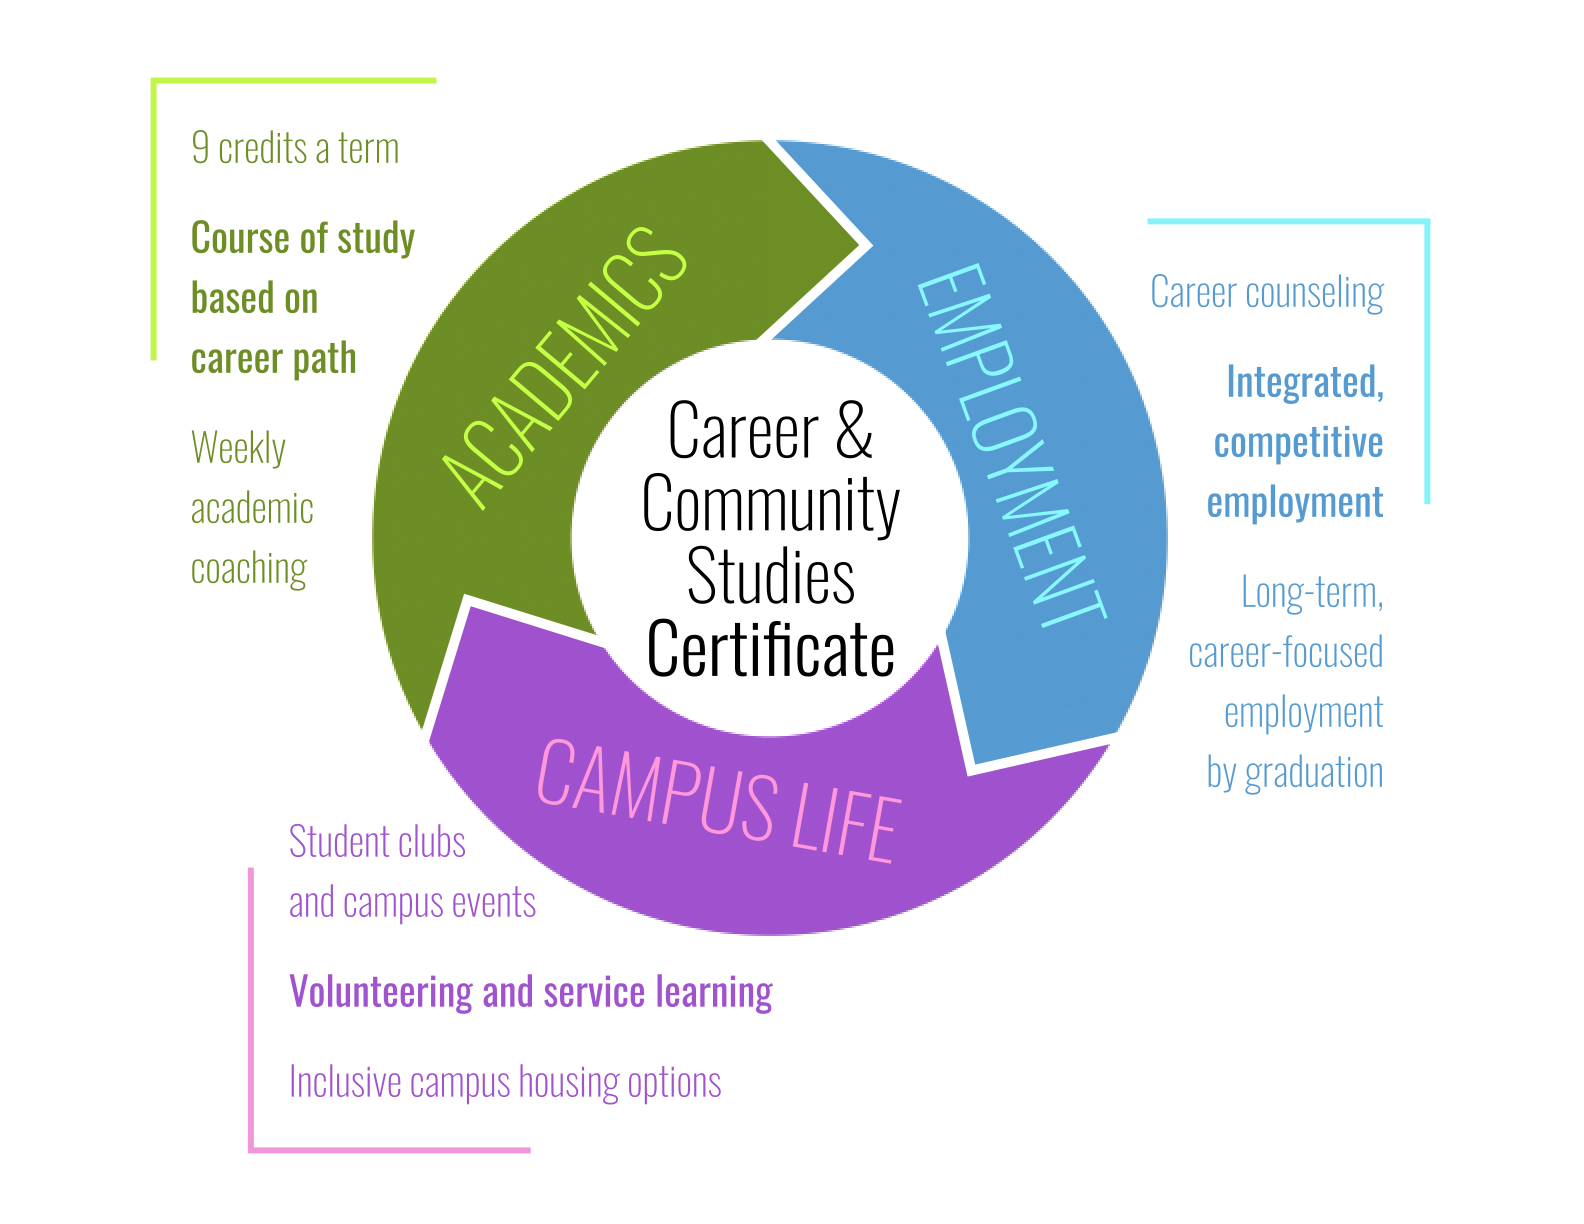 A visual overview of the Career & Community Studies certificate program.